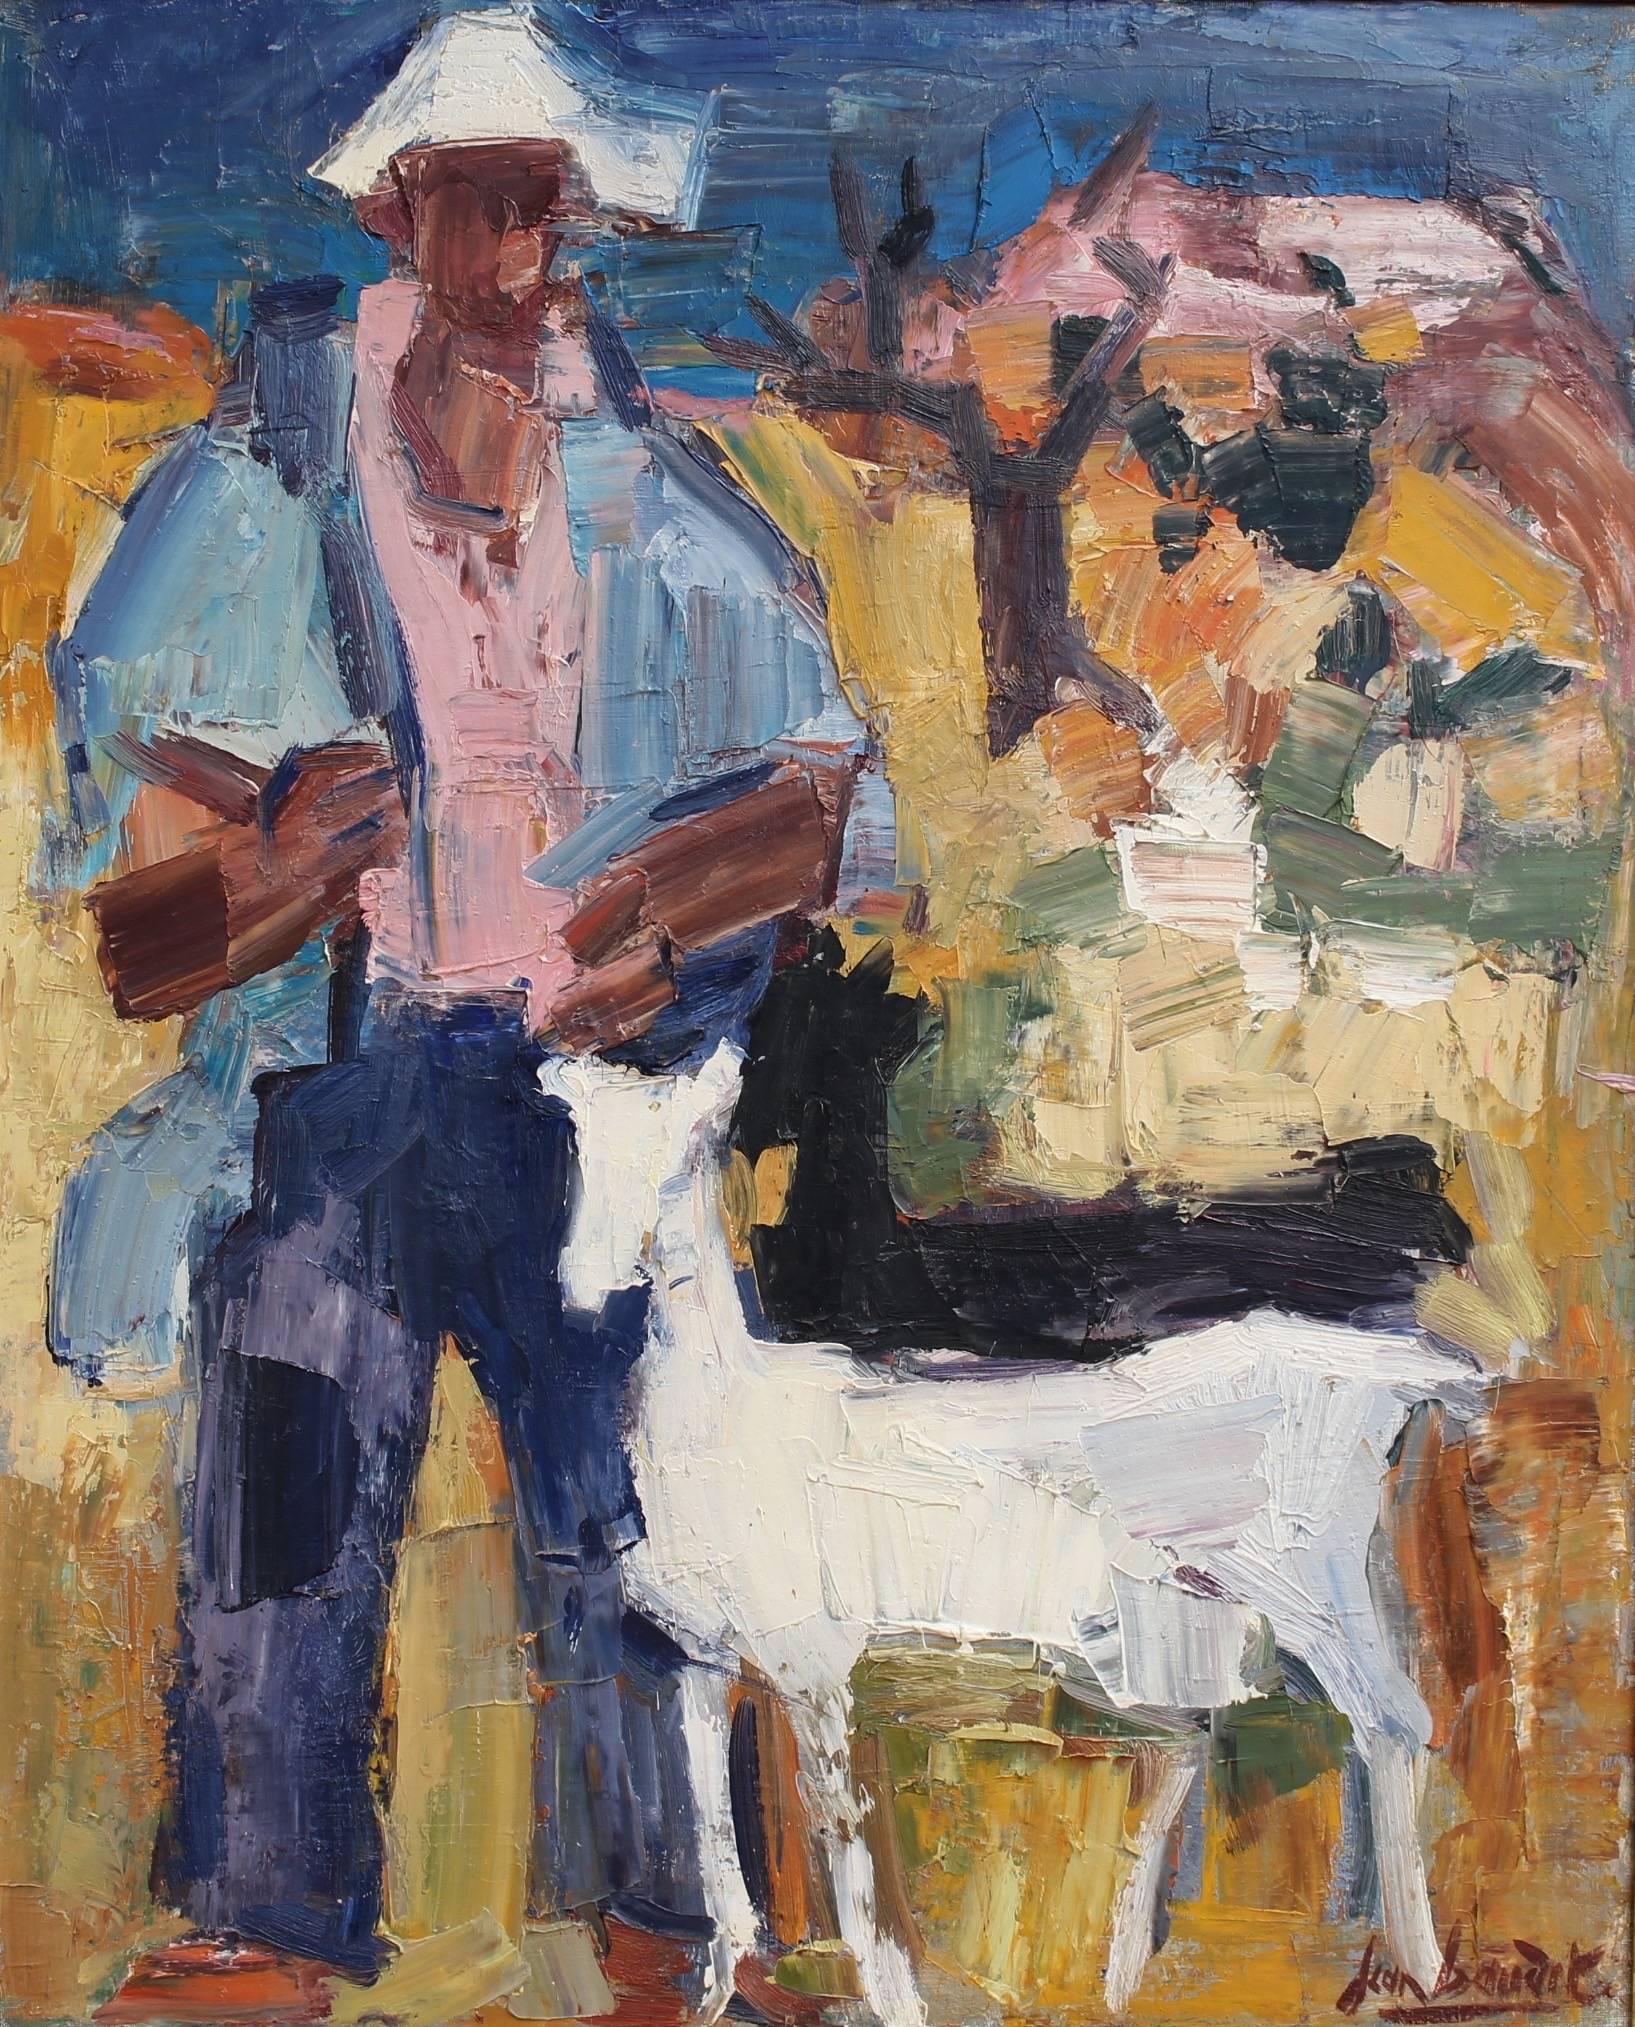 'The Spanish Shepherd' (Le Berger Espagnol), oil on canvas (1966), by Jean Baudet (1914 - 1989). A dynamically colourful expressionist work which is beautifully simple and very sophisticated at the same time. The bond between human, animal and earth